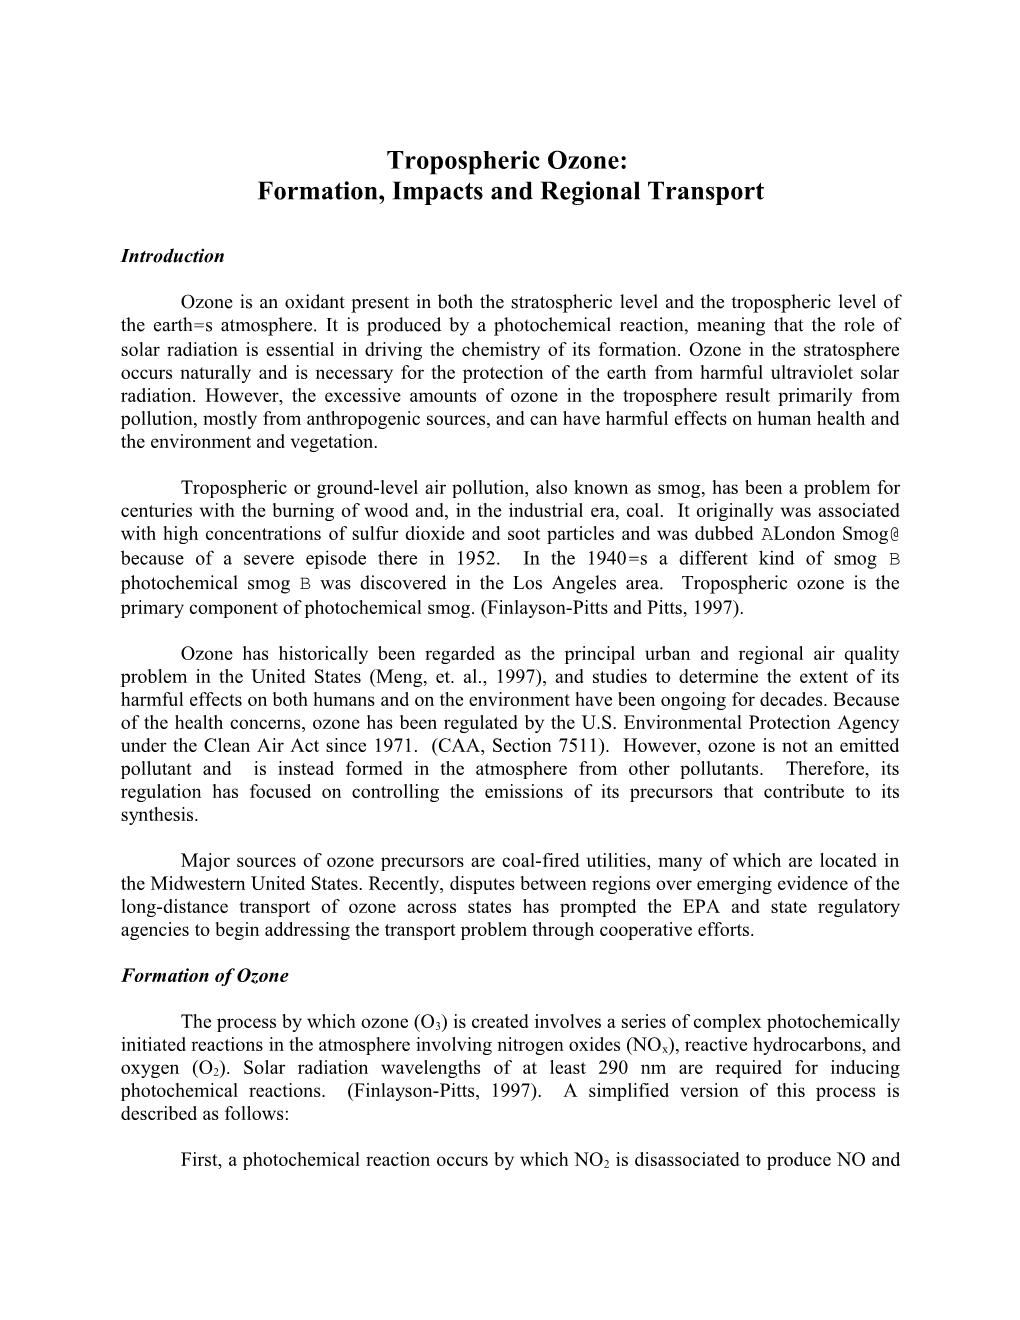 Formation, Impacts and Regional Transport